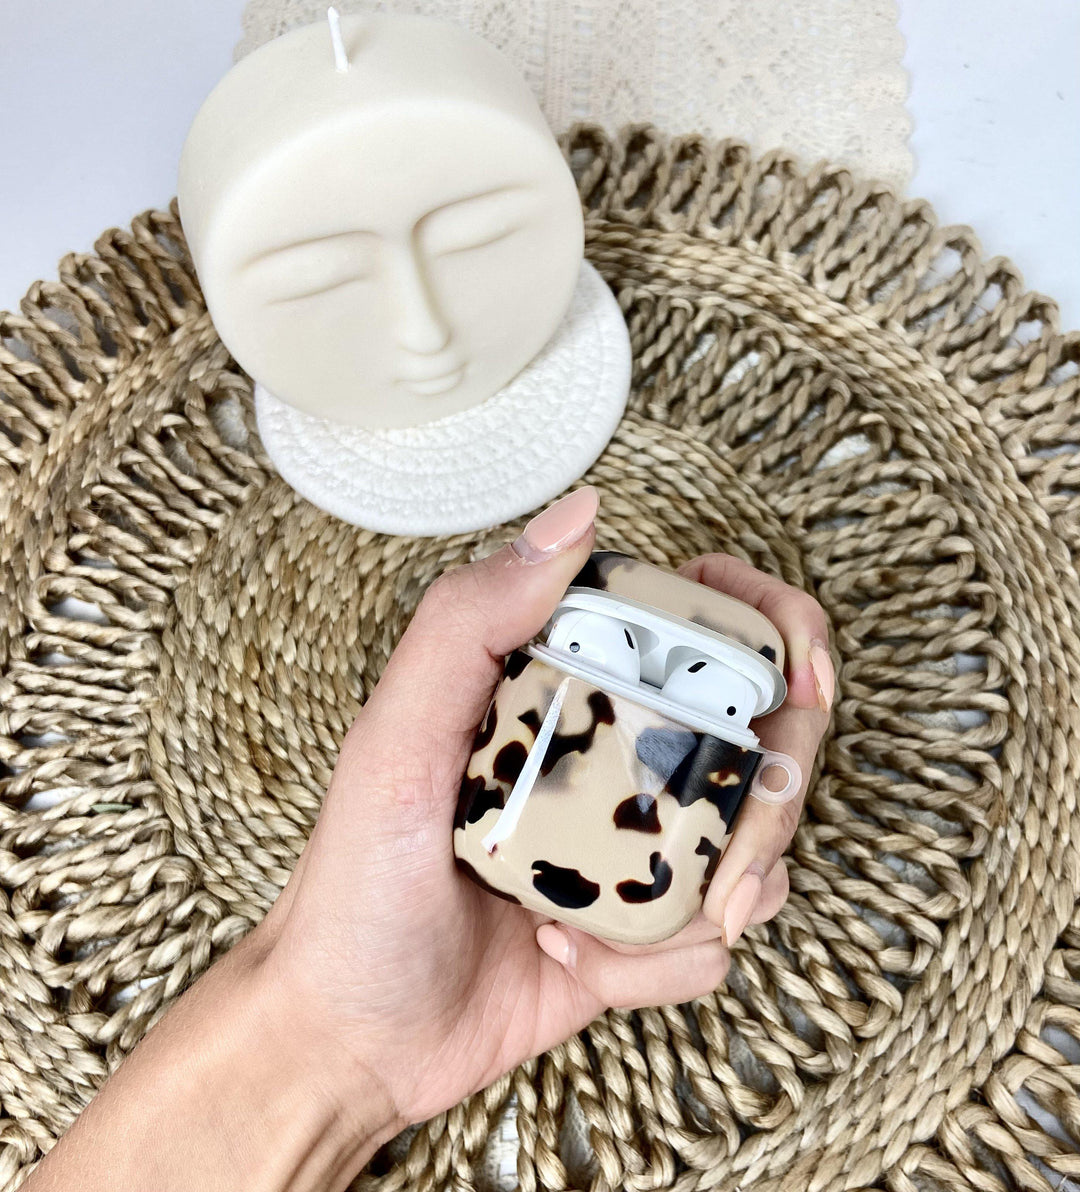 Ivory Tort Airpods Case by Coconut Lane